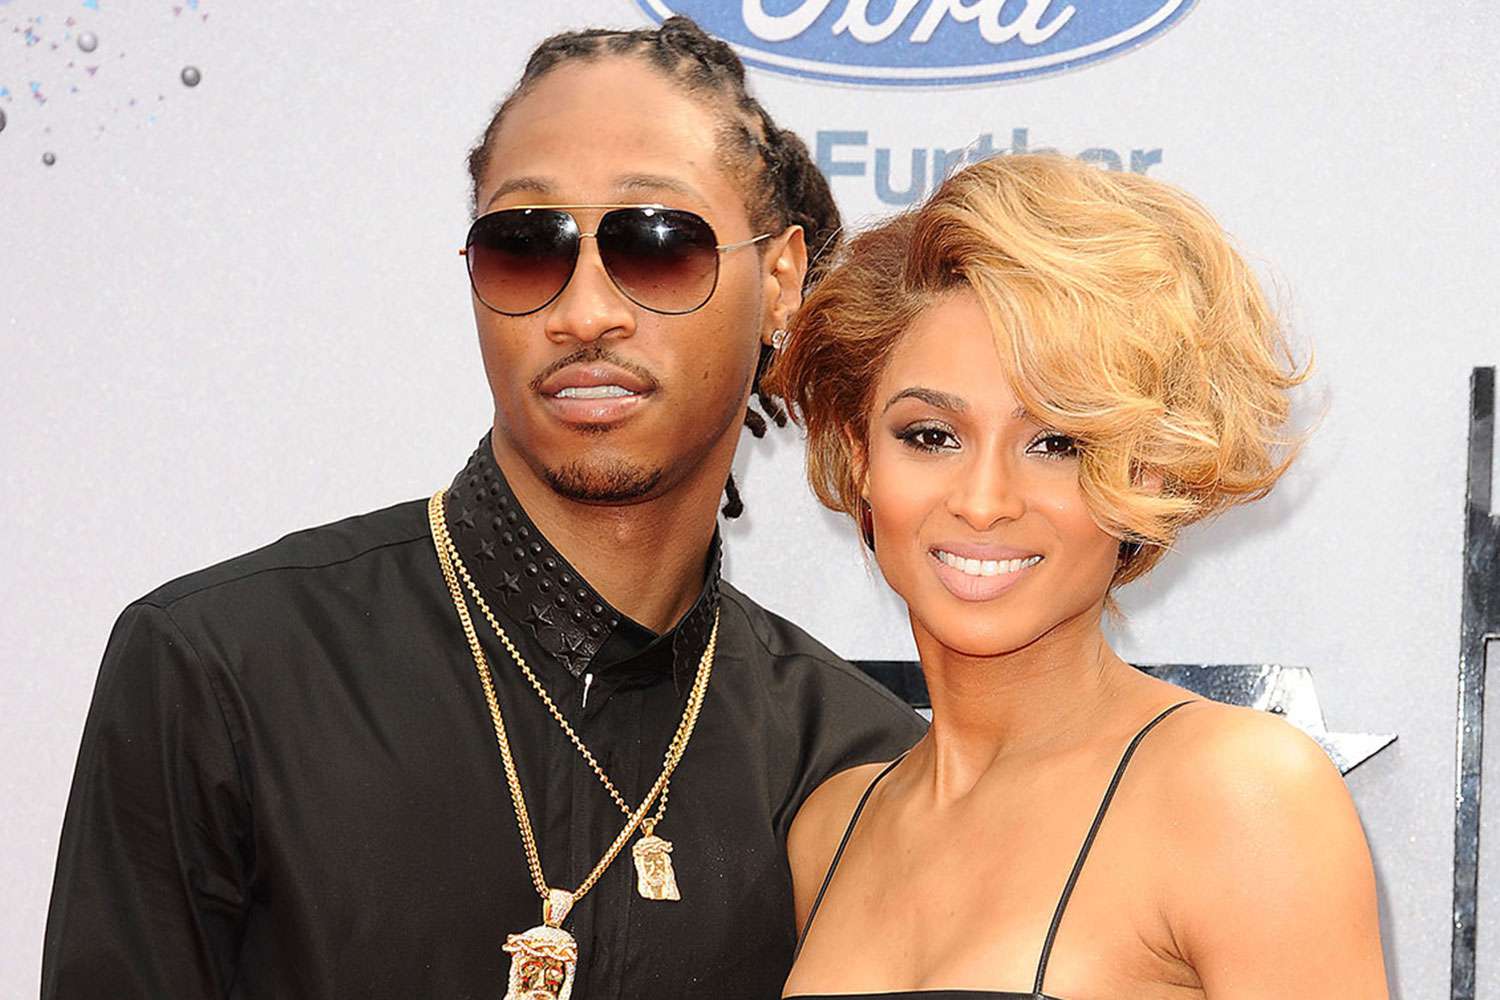  Future Appears to Diss Ex-Fiancé Ciara’s Husband Russell Wilson on New Song: ‘F--- Russell’ 